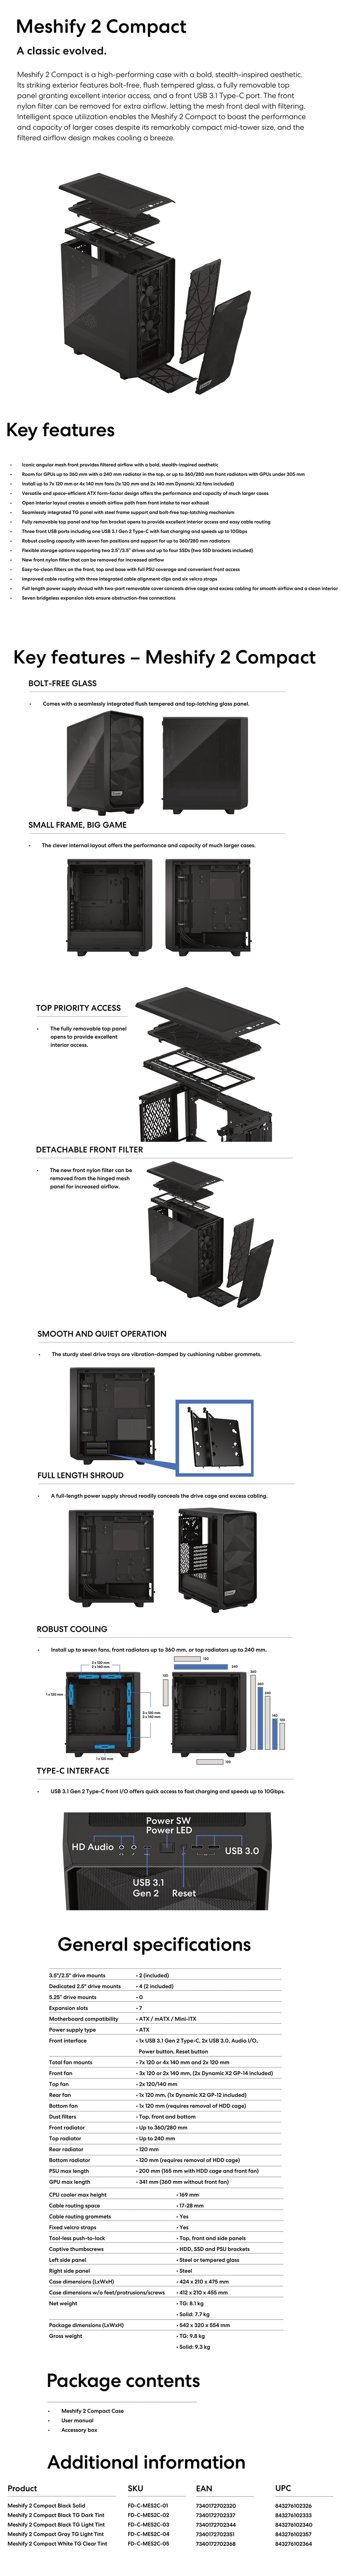 A large marketing image providing additional information about the product Fractal Design Meshify 2 Compact TG Light Tint Mid Tower Case - Black - Additional alt info not provided